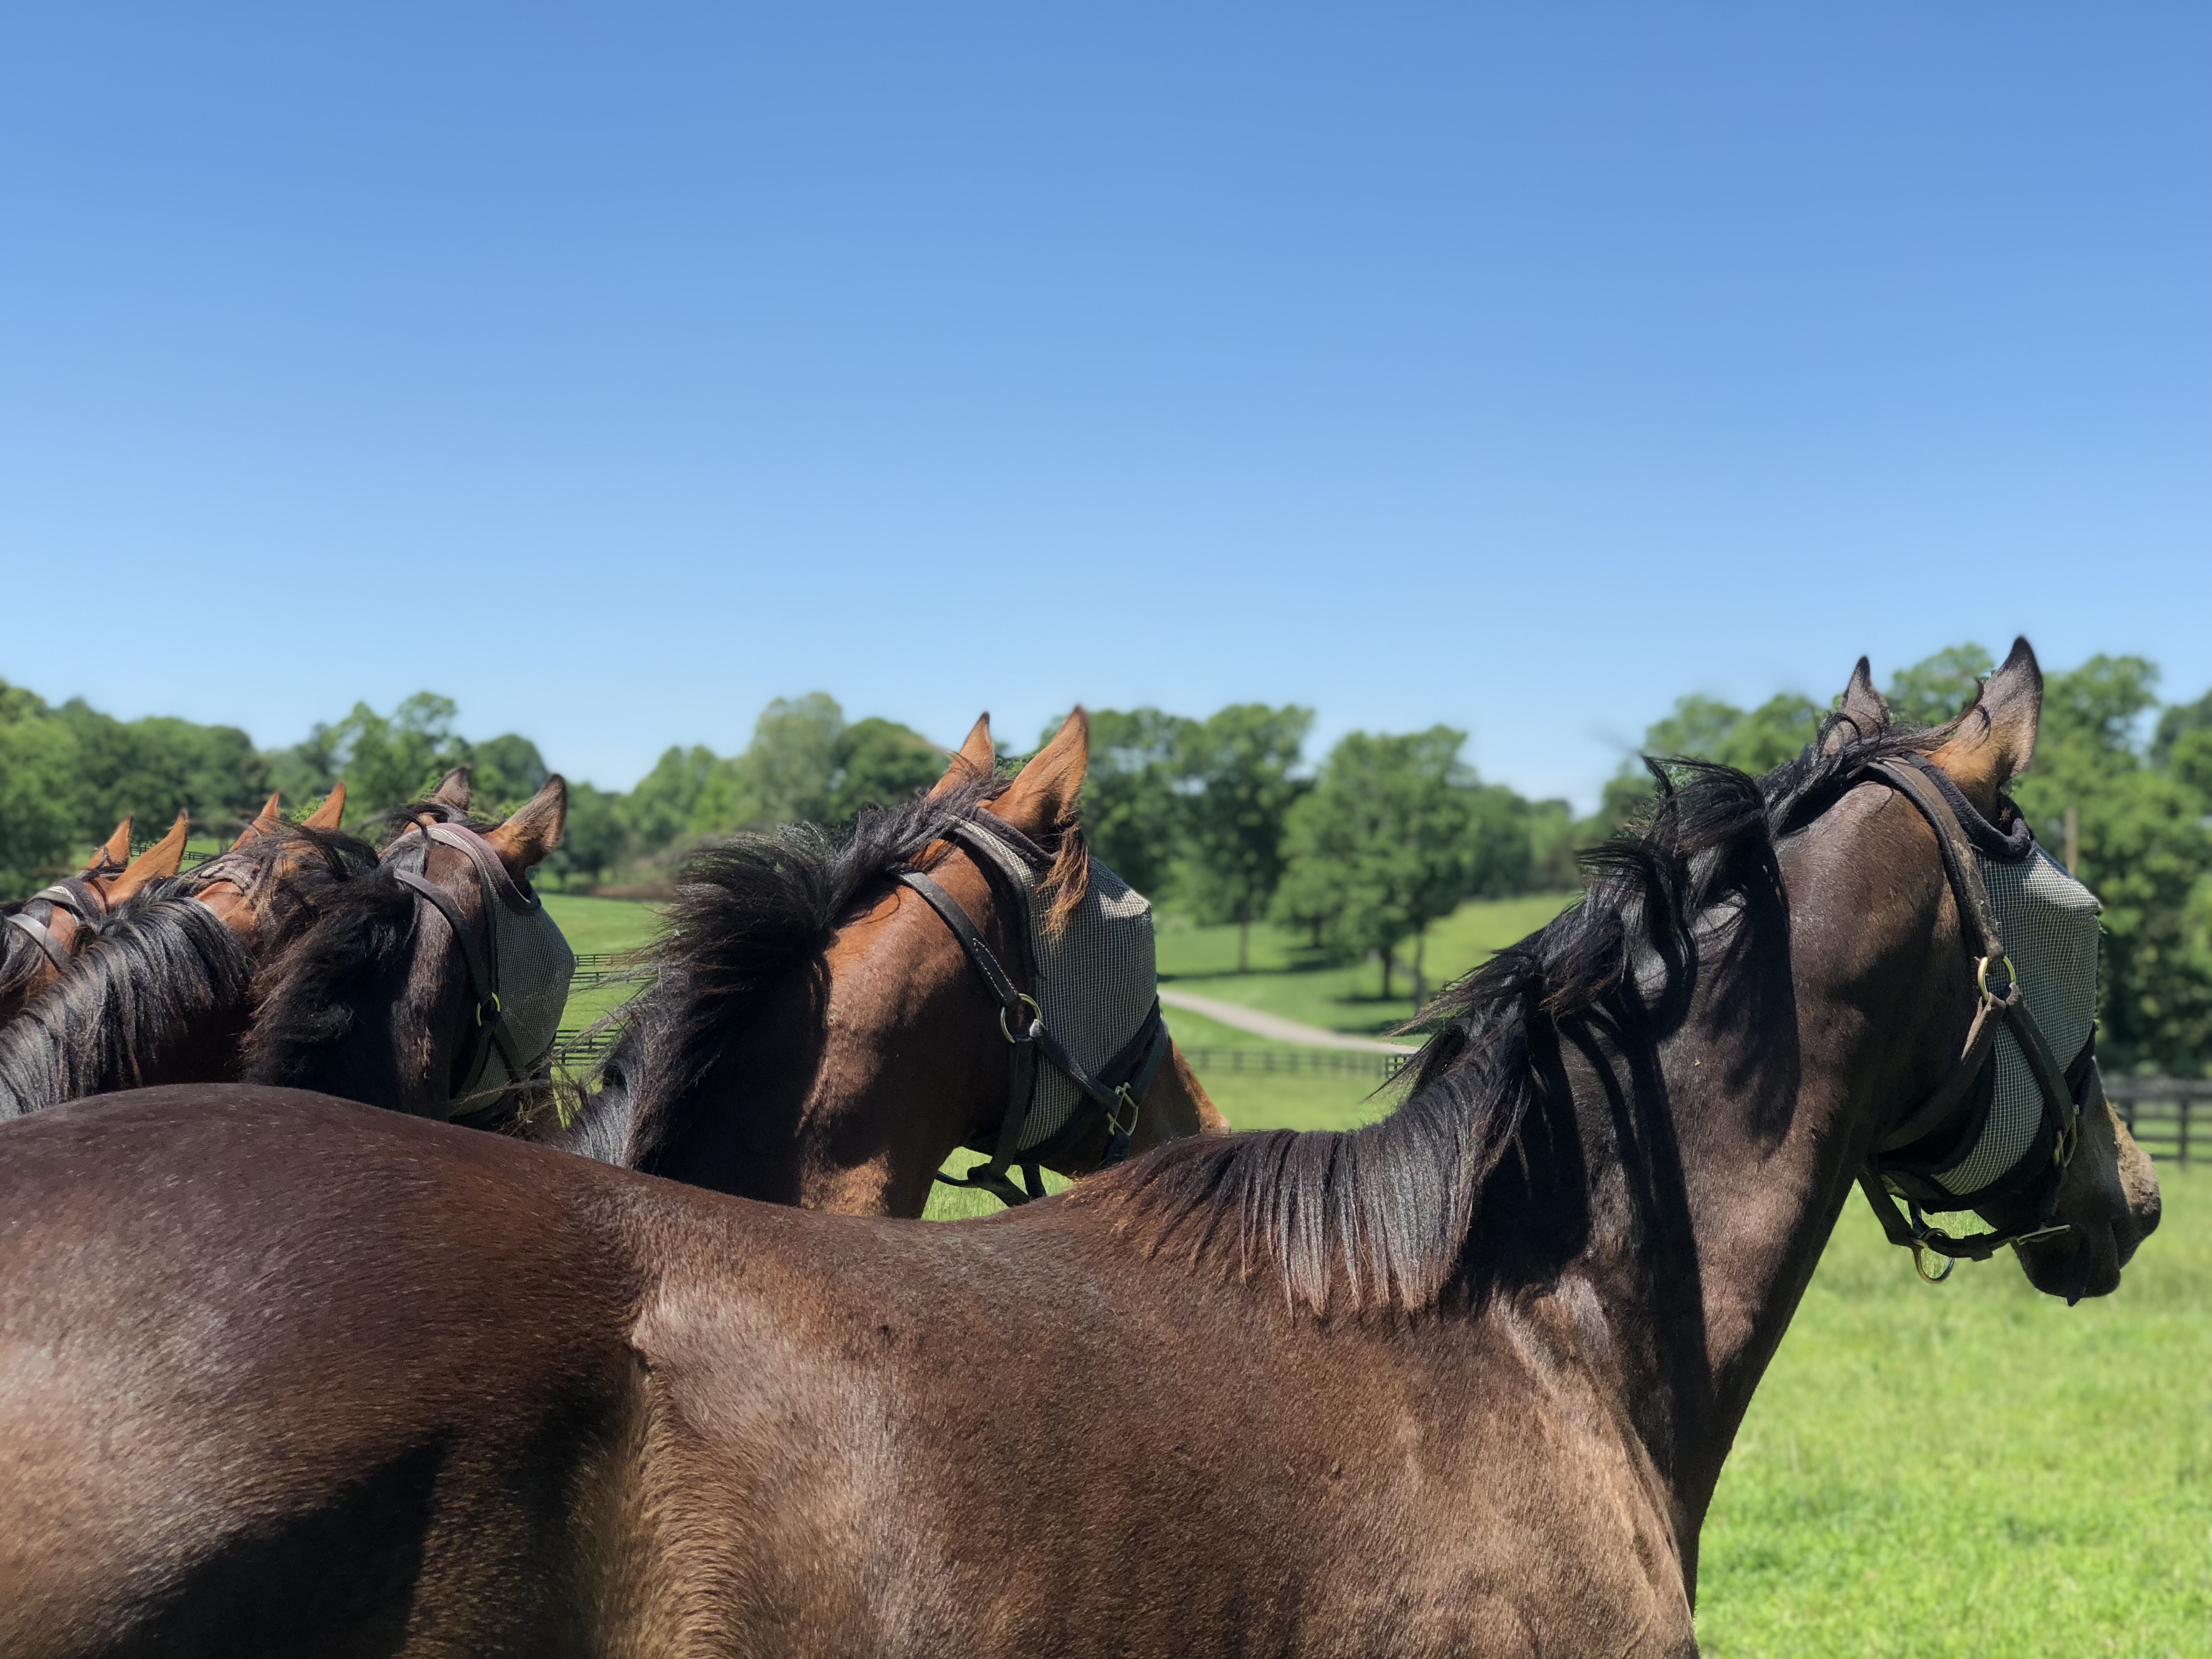 Yearling horses staring off into the distance.